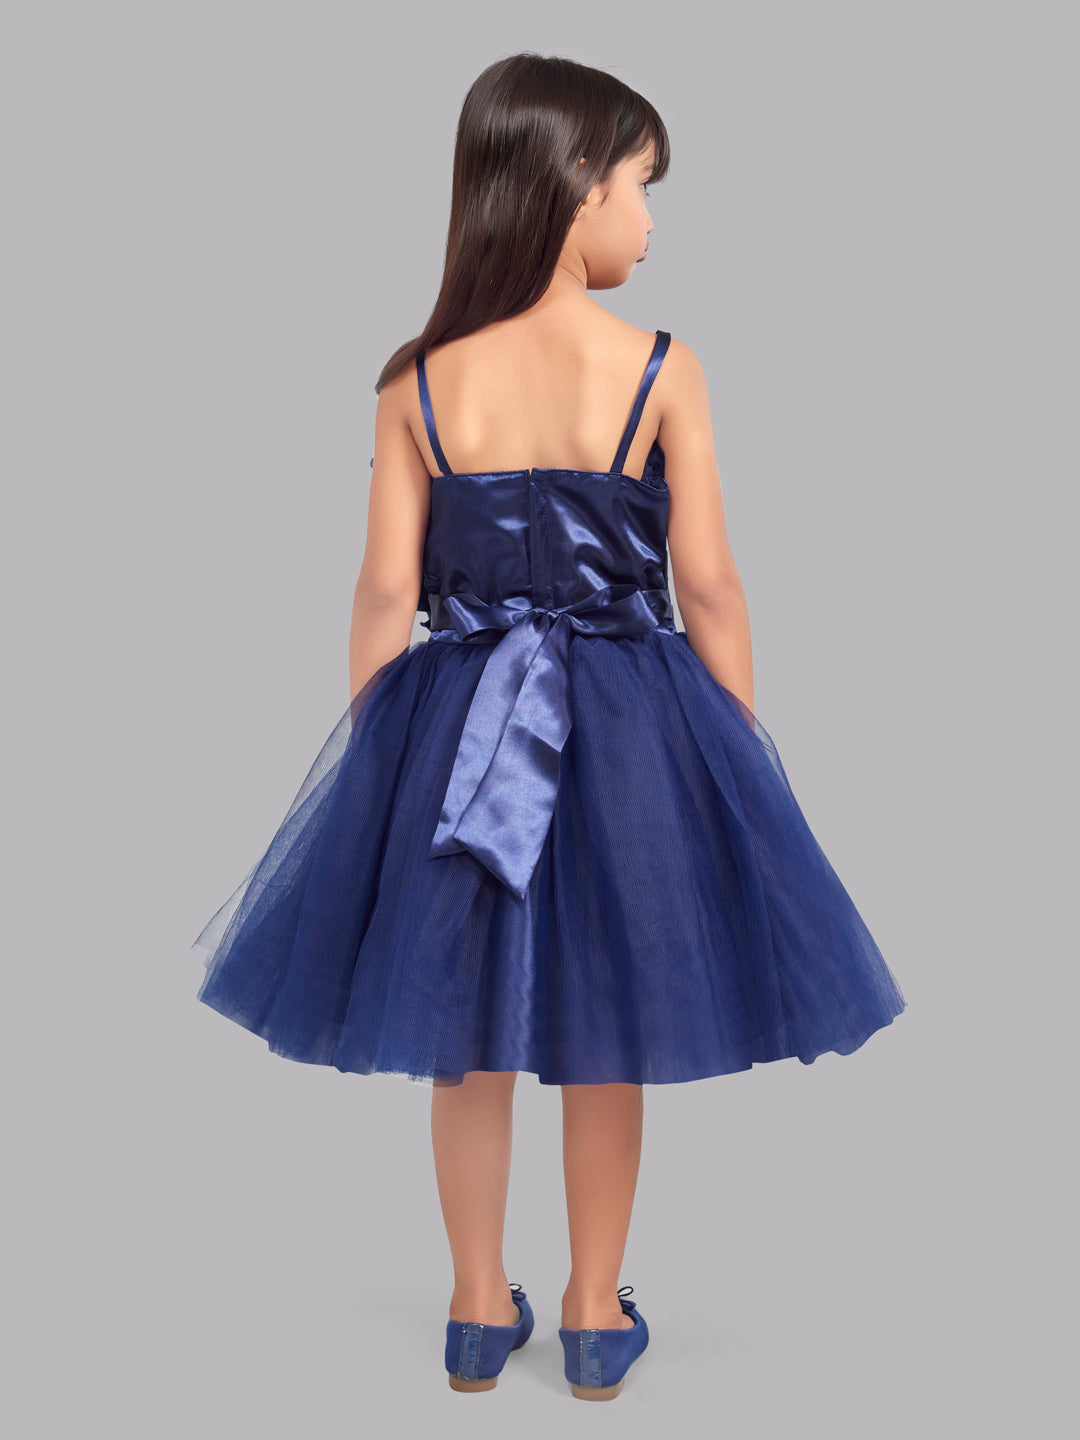 Ruffled Silhouette Party Dress -Navy Blue